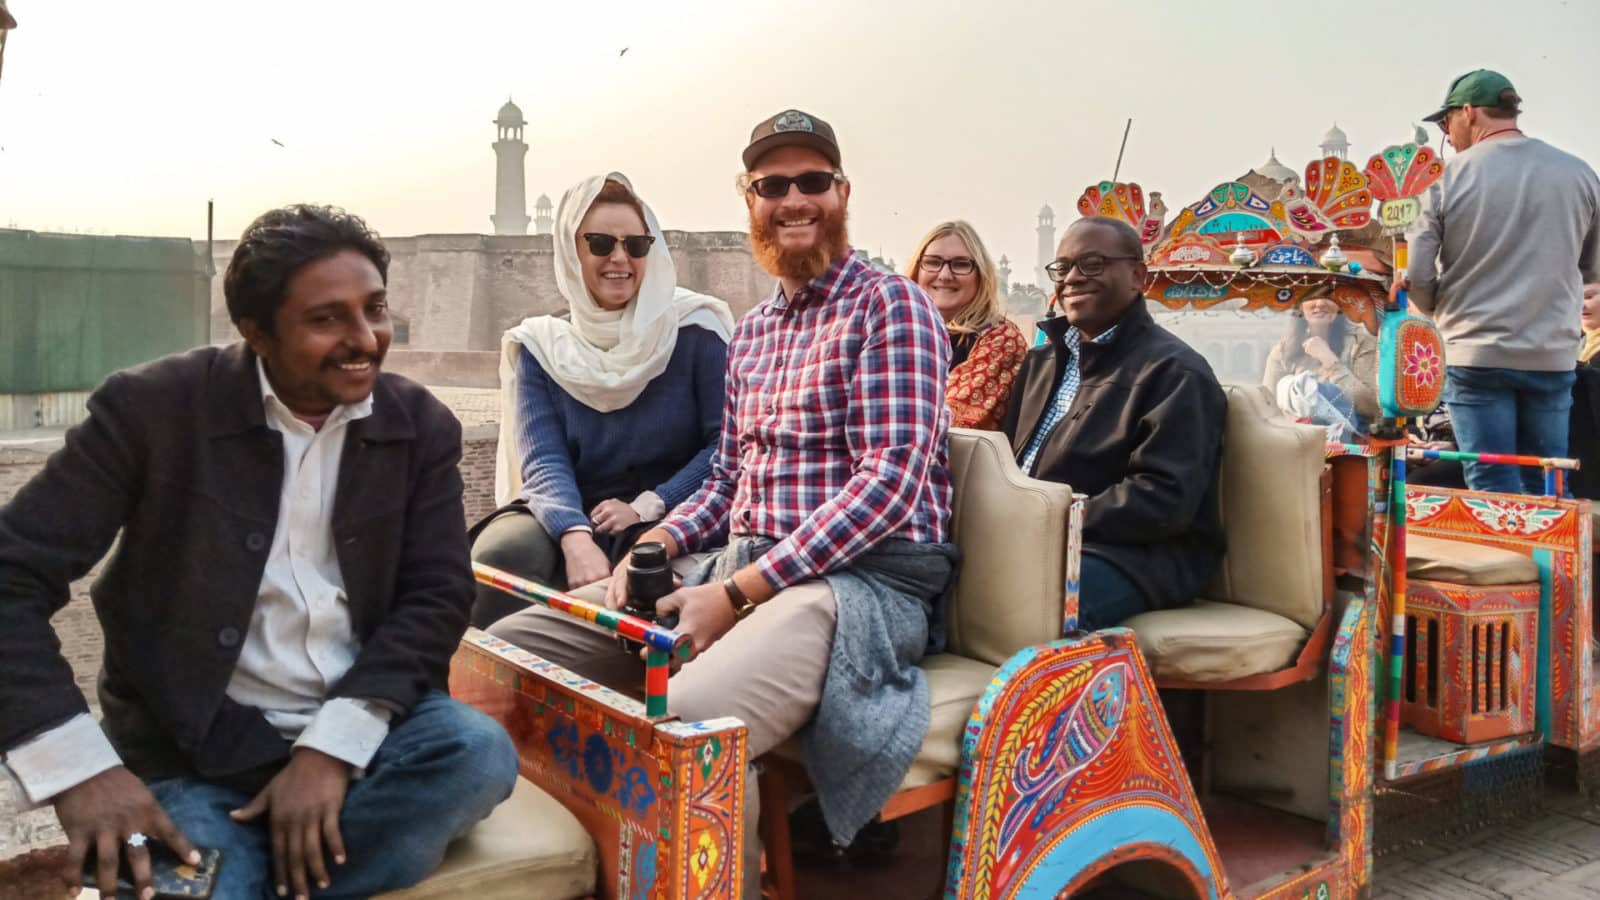 Tour guests and leader on a new Intrepid Travel tour to Pakistan